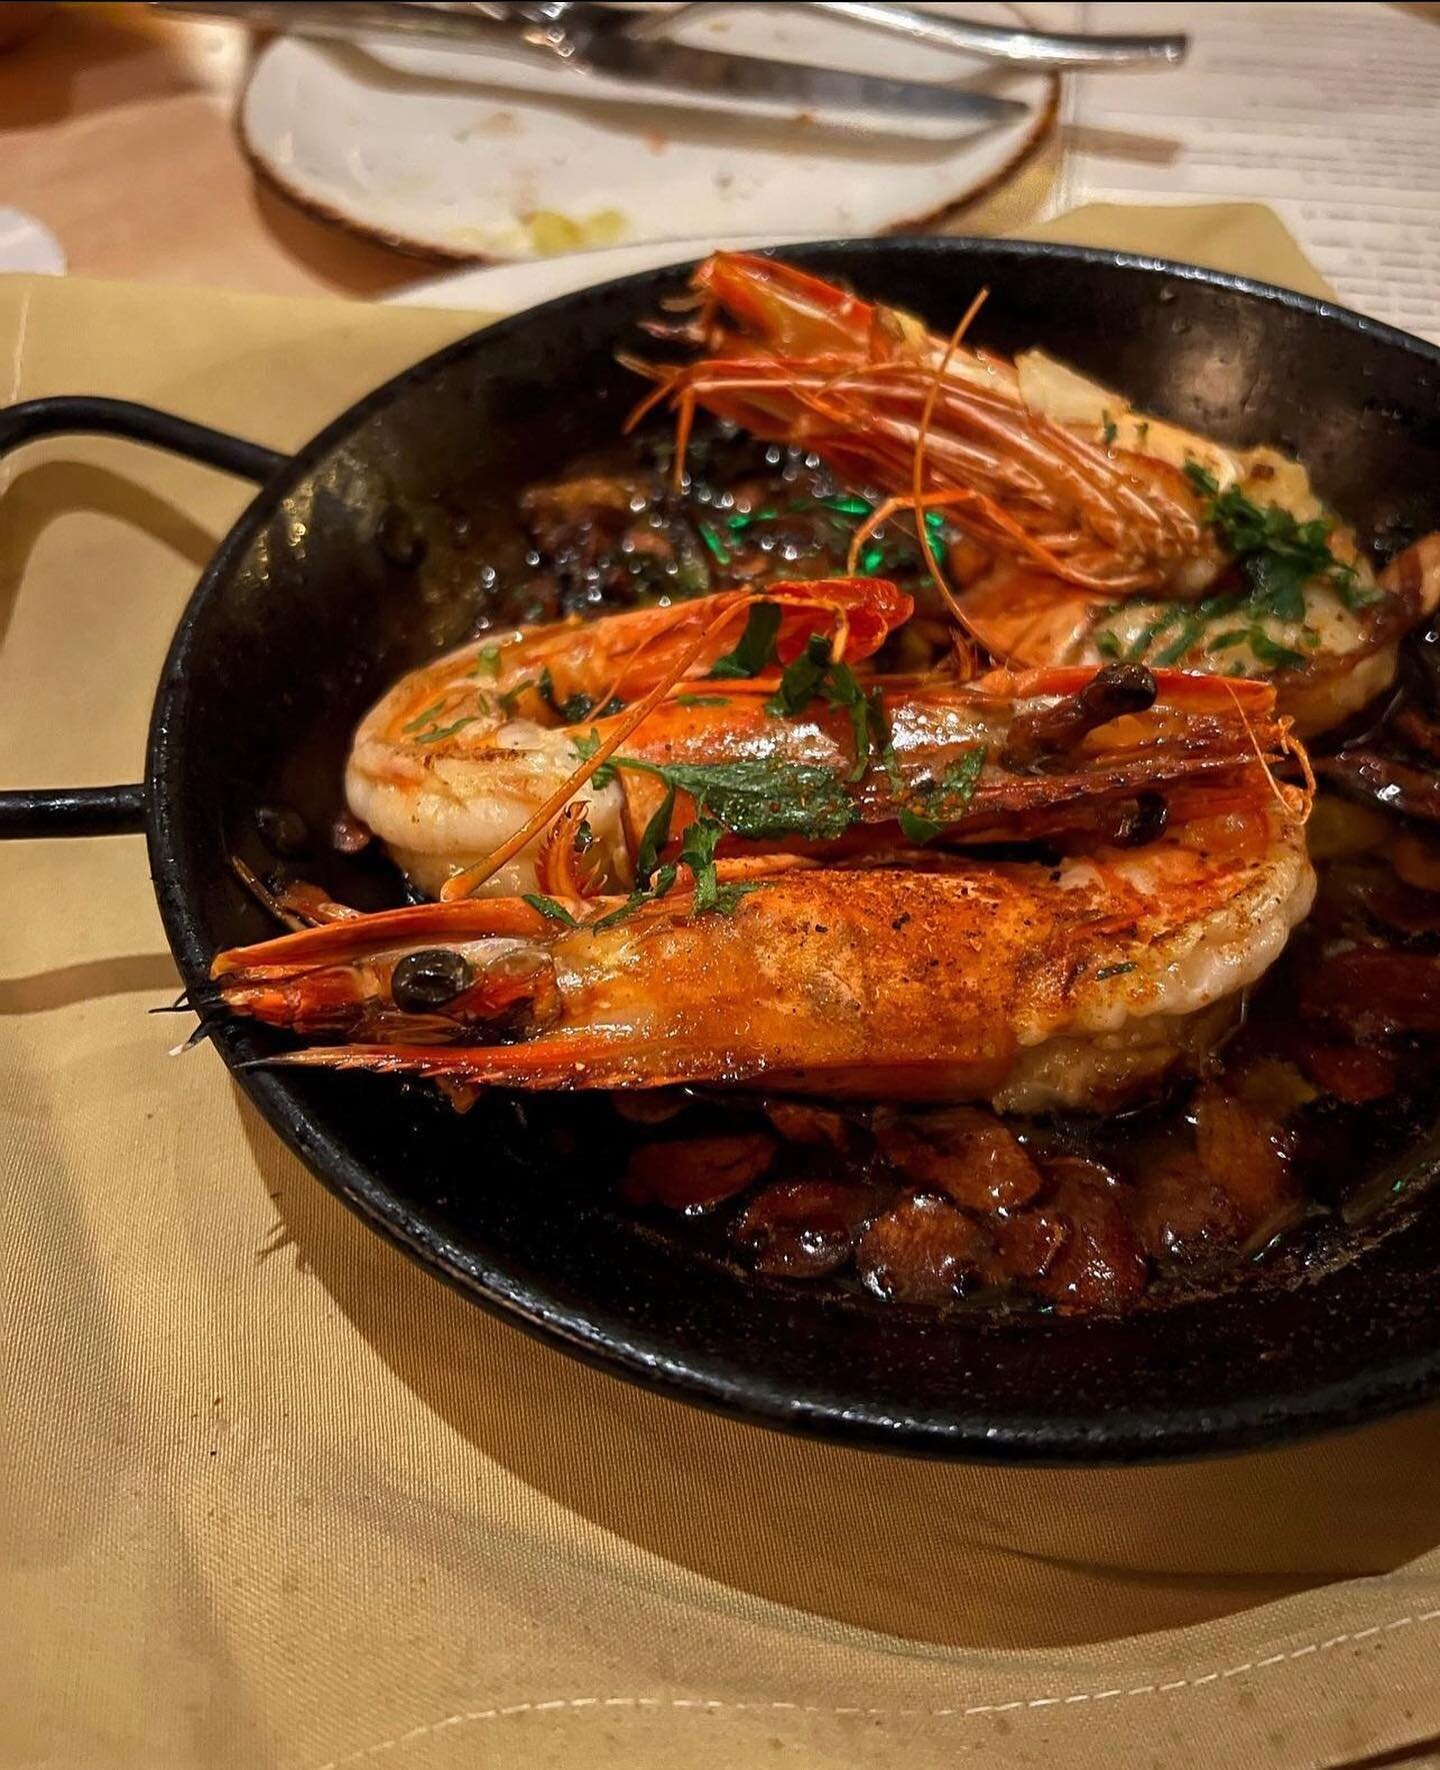 Gambas al Ajillo is a timeless dish in Spanish cuisine and we take it one step further with our unique twist: crispy garlic, arbol chili, and cognac. ⁠
⁠
It's just an example of how we try to challenge ourselves through classic recipes! ⁠
⁠
Reservati